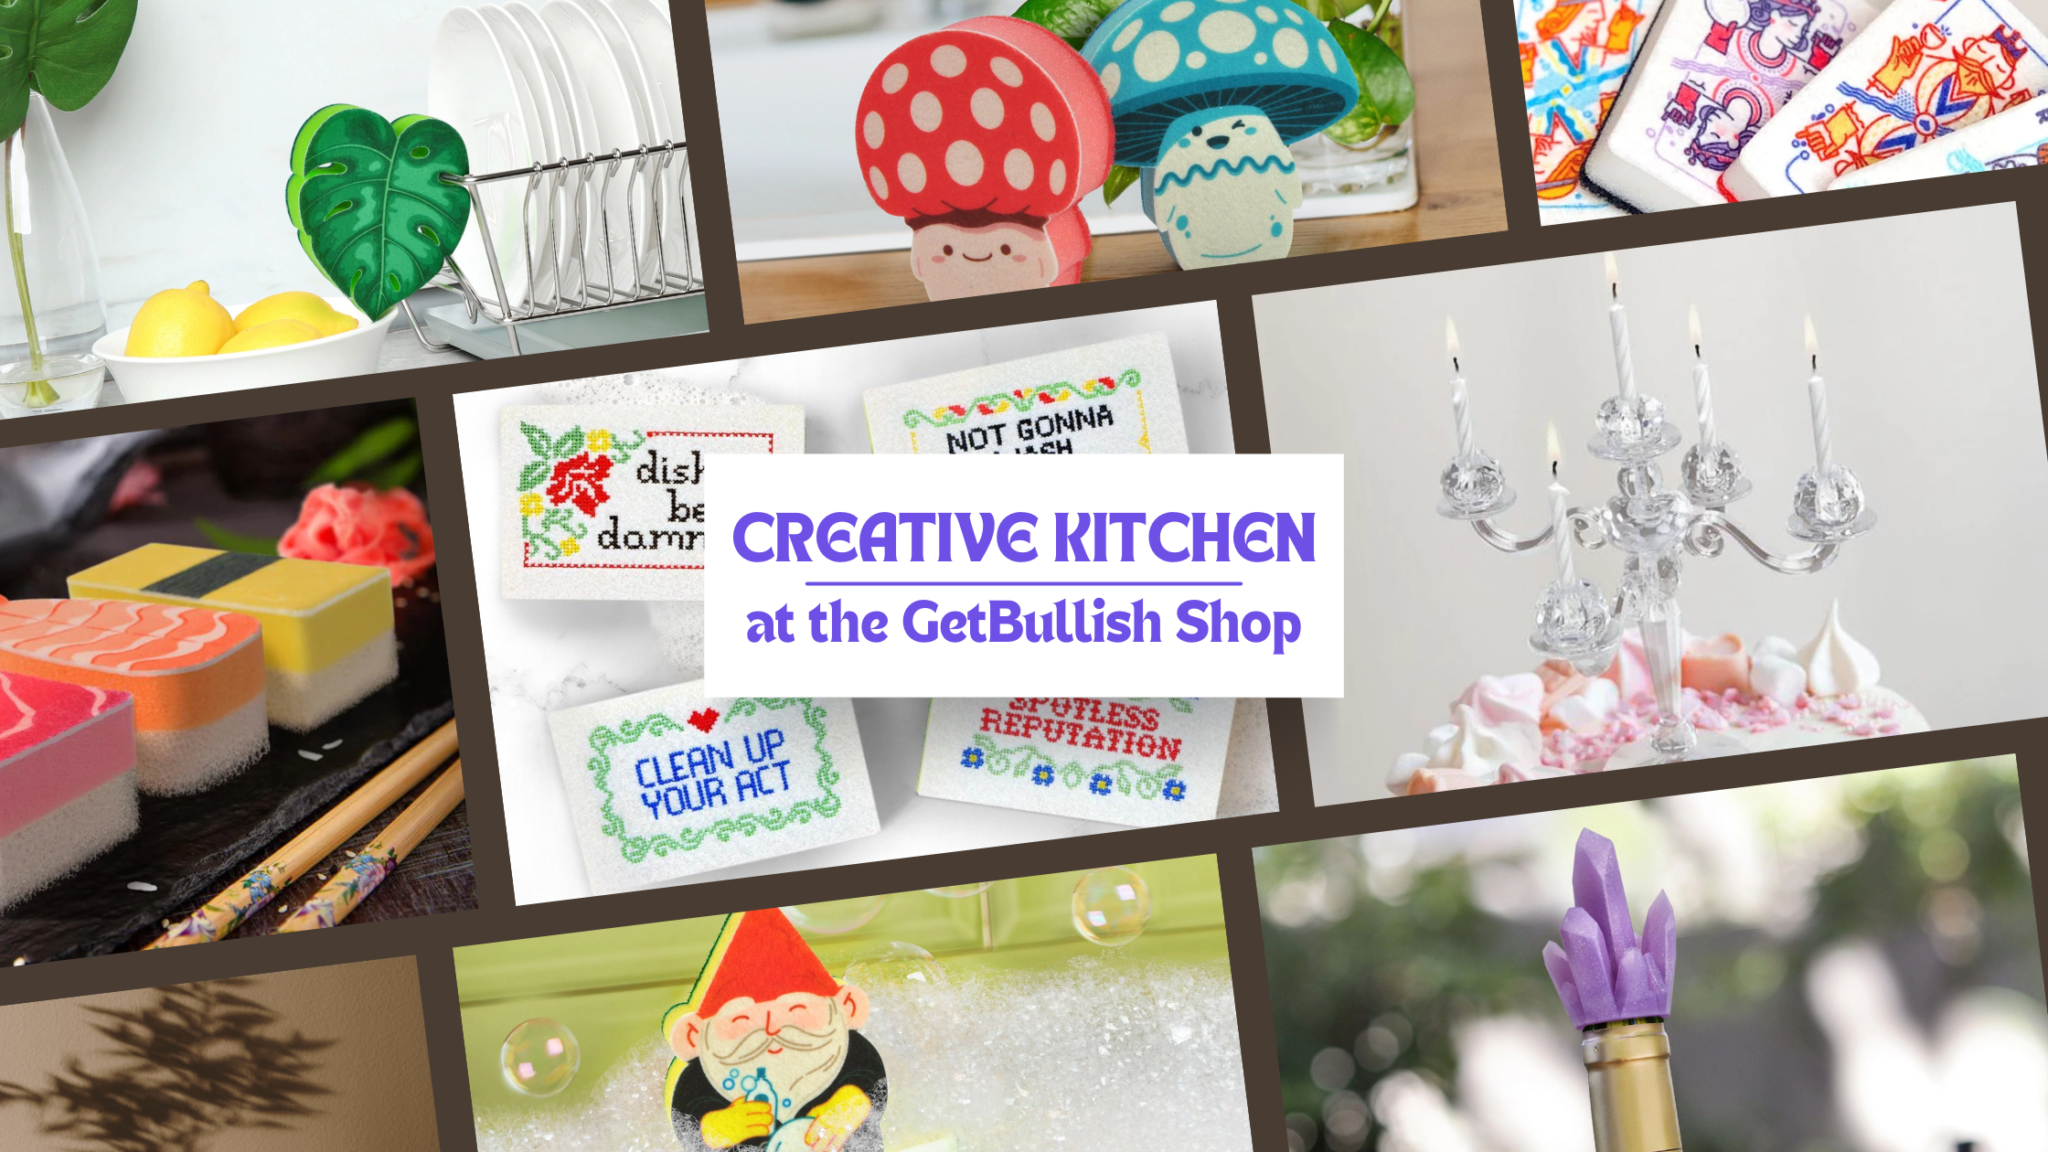 Funny kitchen sponges and birthday items on the GetBullish store